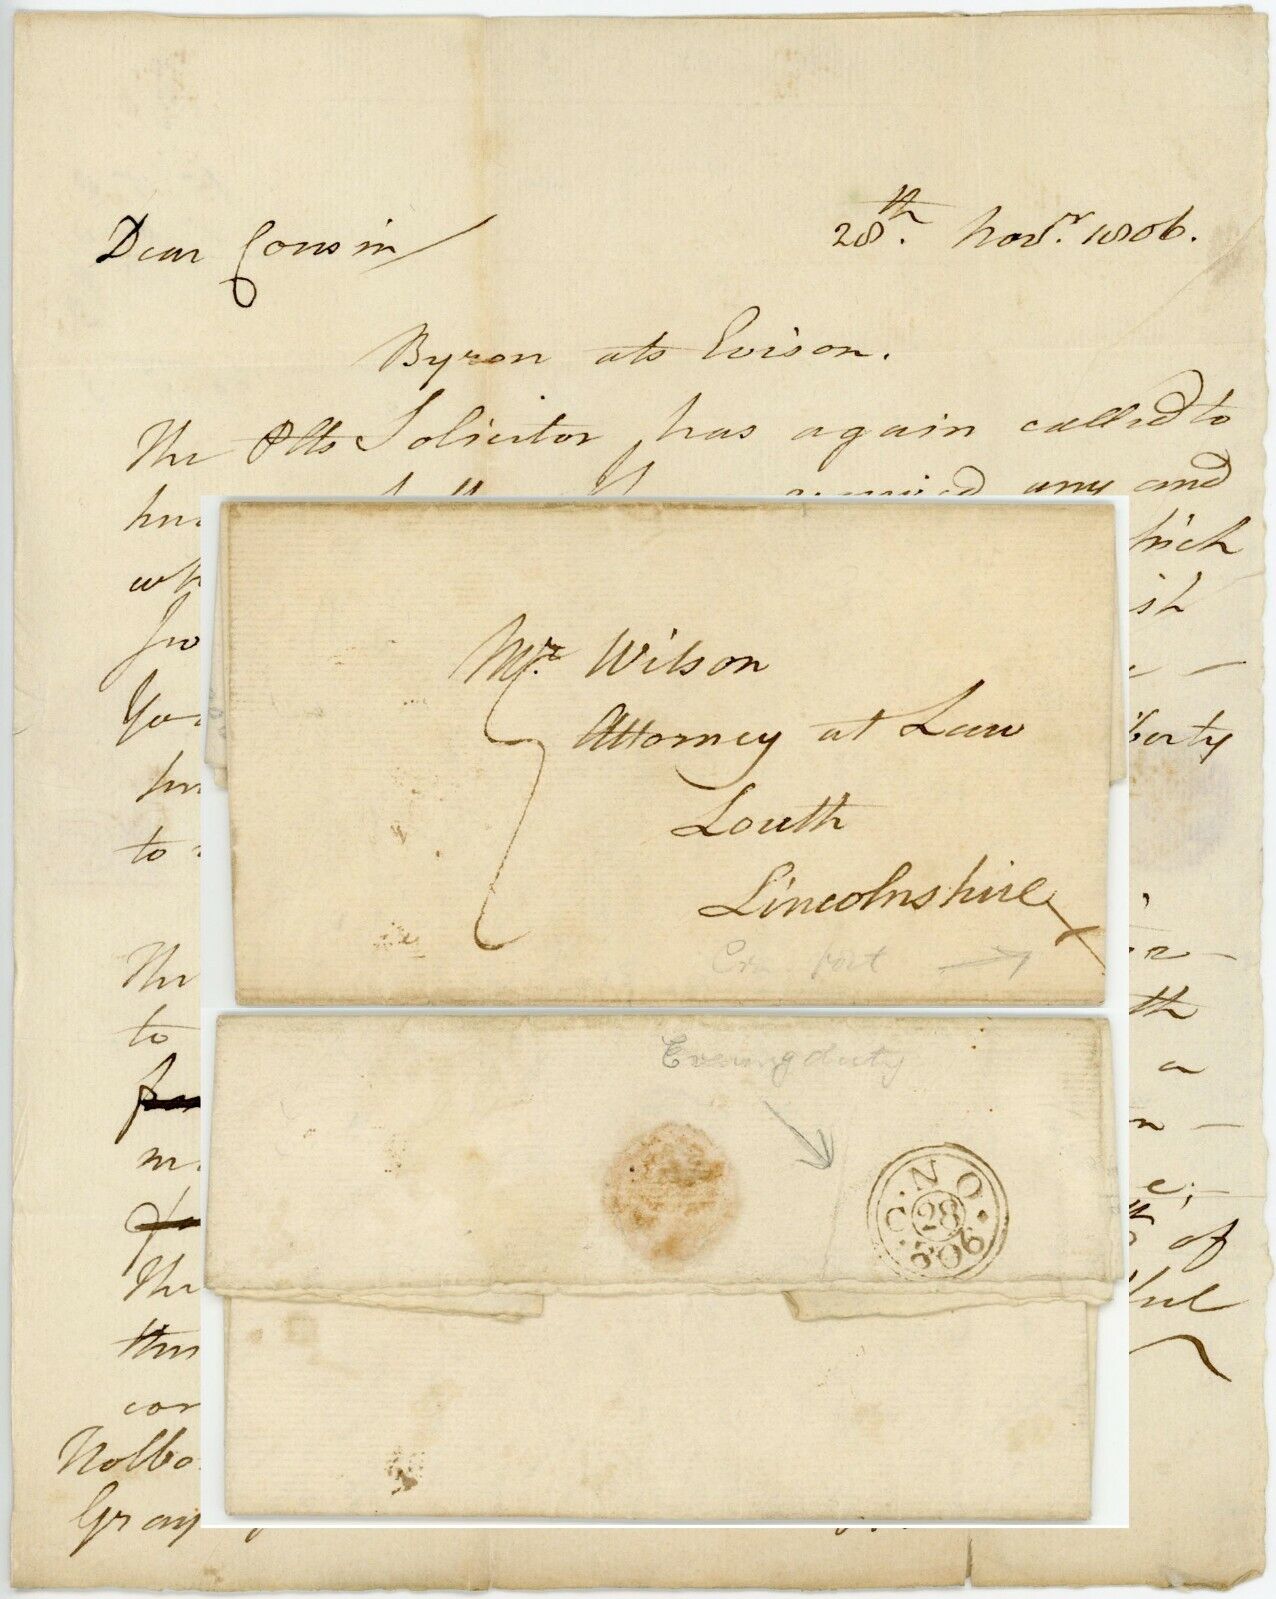 1806 LETTER J.PEARSON to COUSIN WILSON LOUTH re BYRON EVISON LOUTH LINCOLNSHIRE